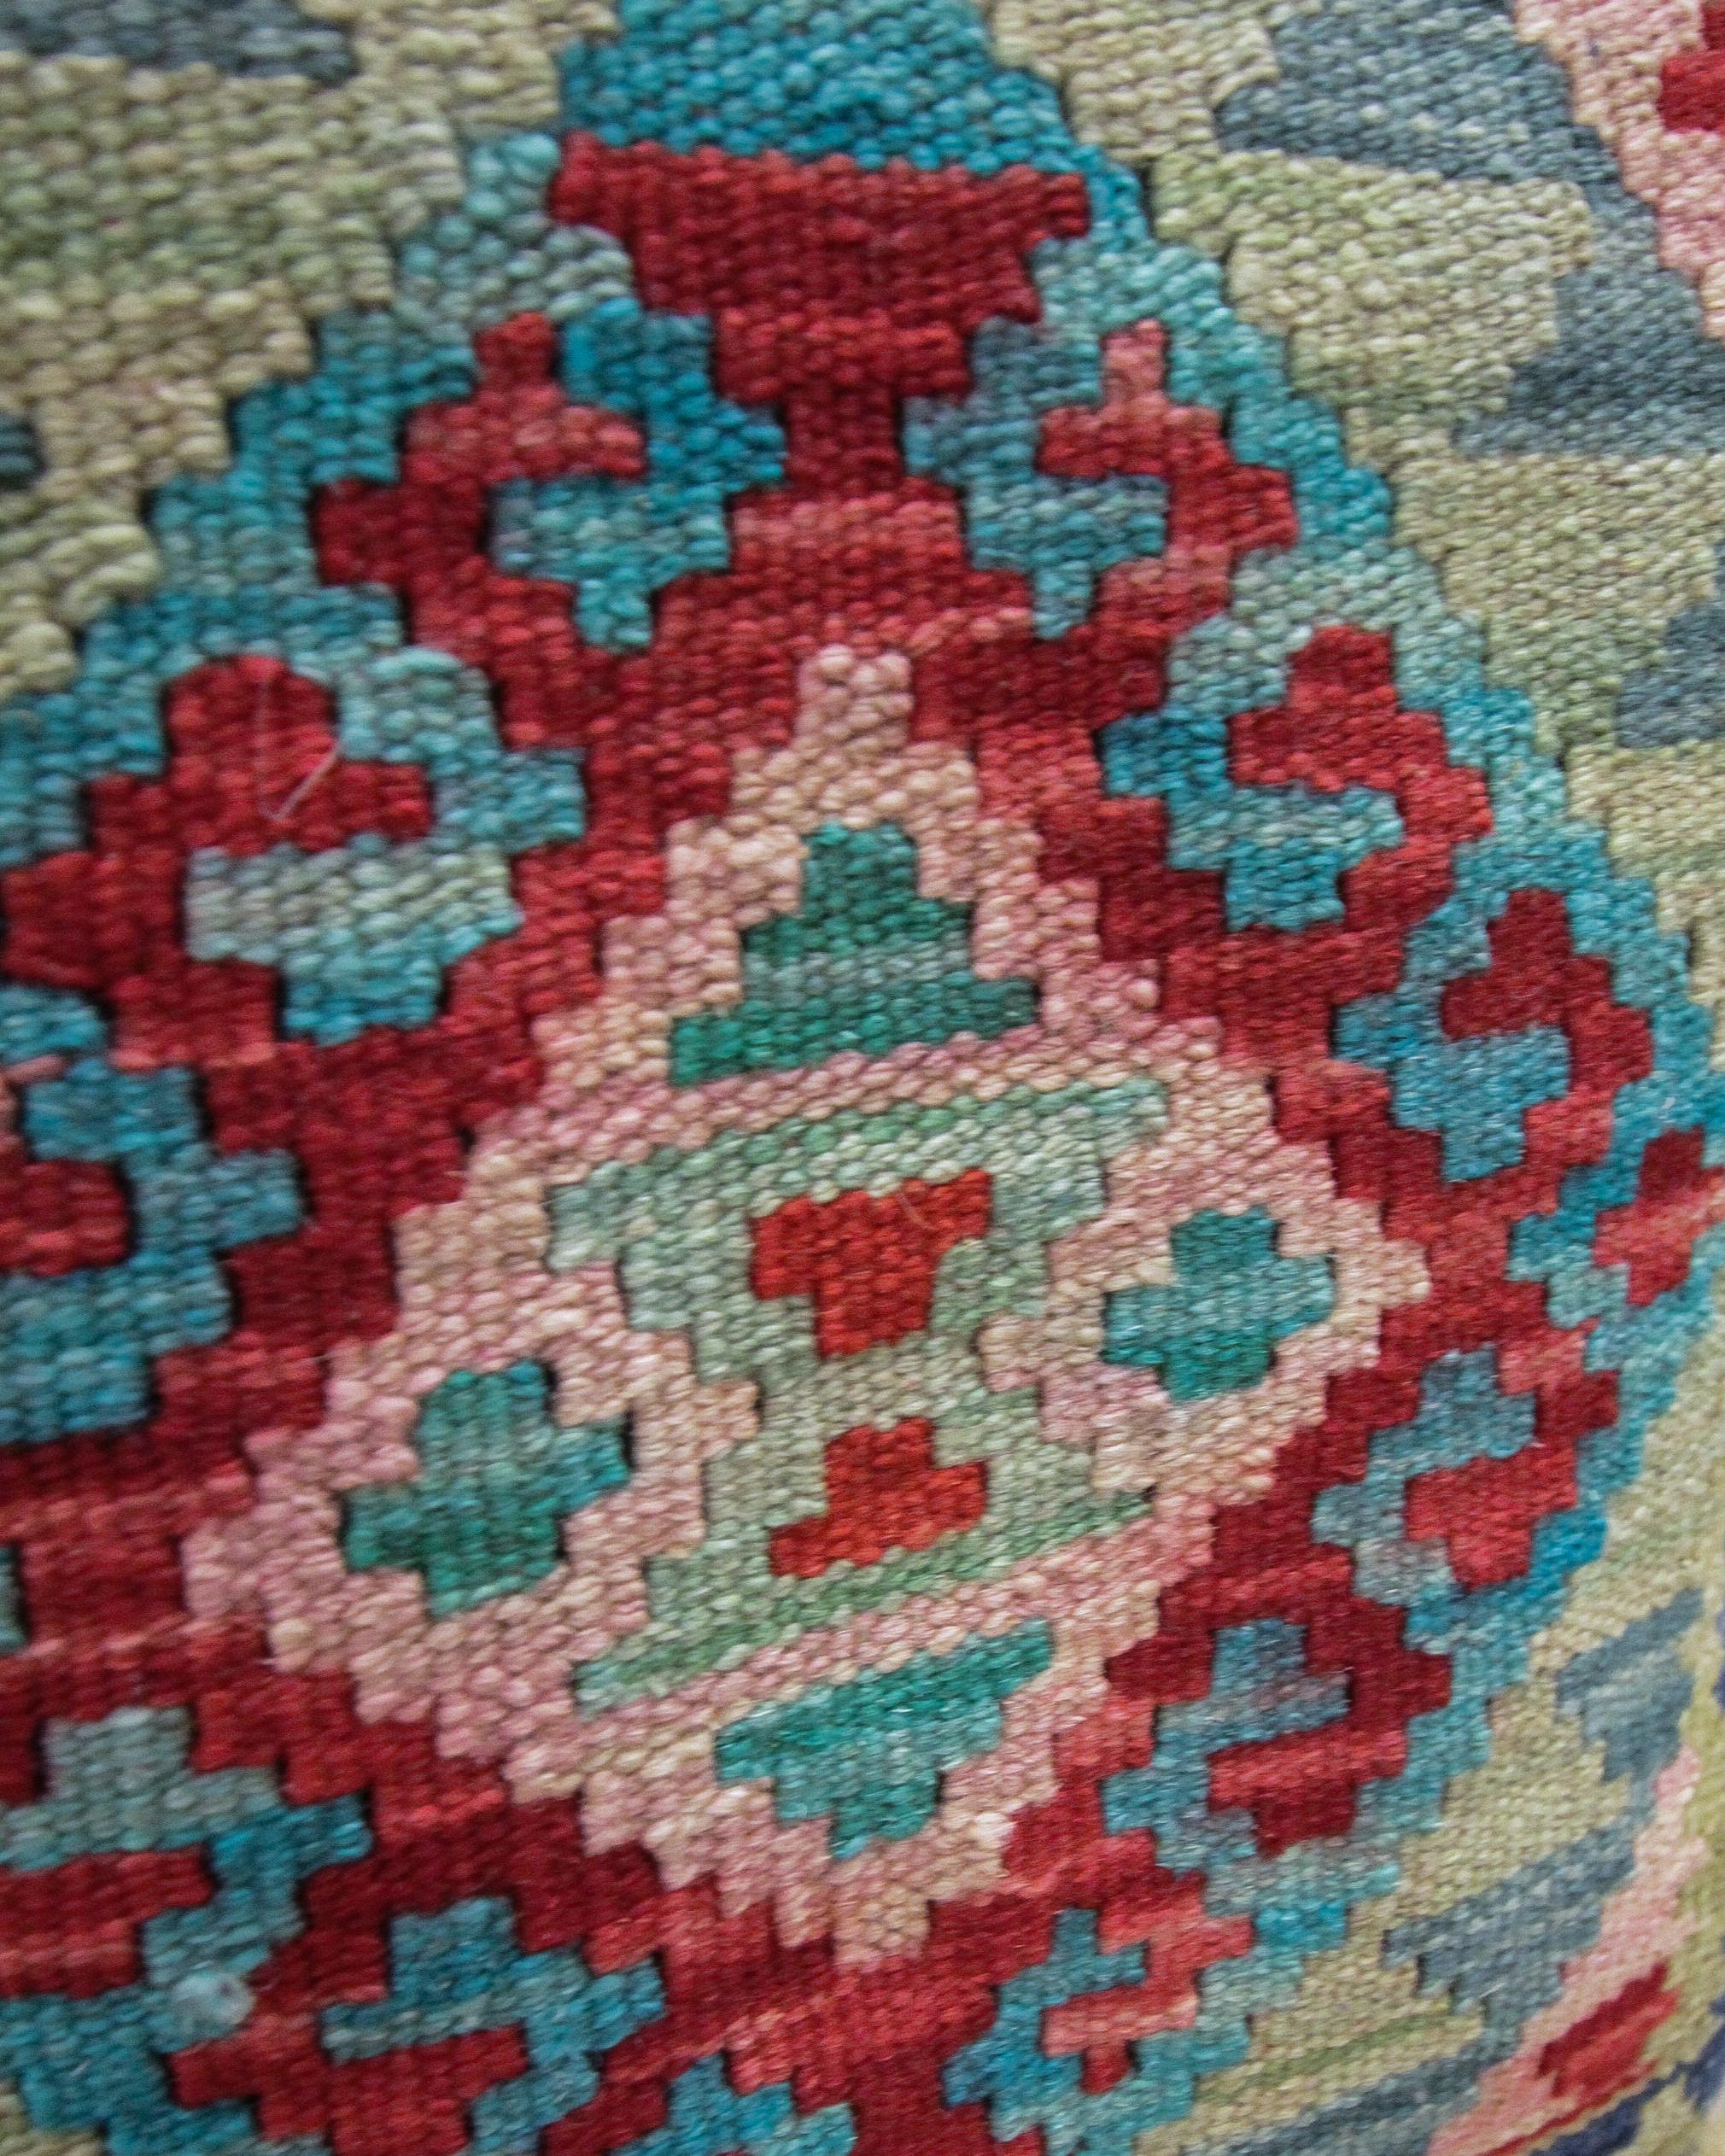 Afghan Kilim Cushion Cover New Blue Green Handwoven Wool Scatter Cushion